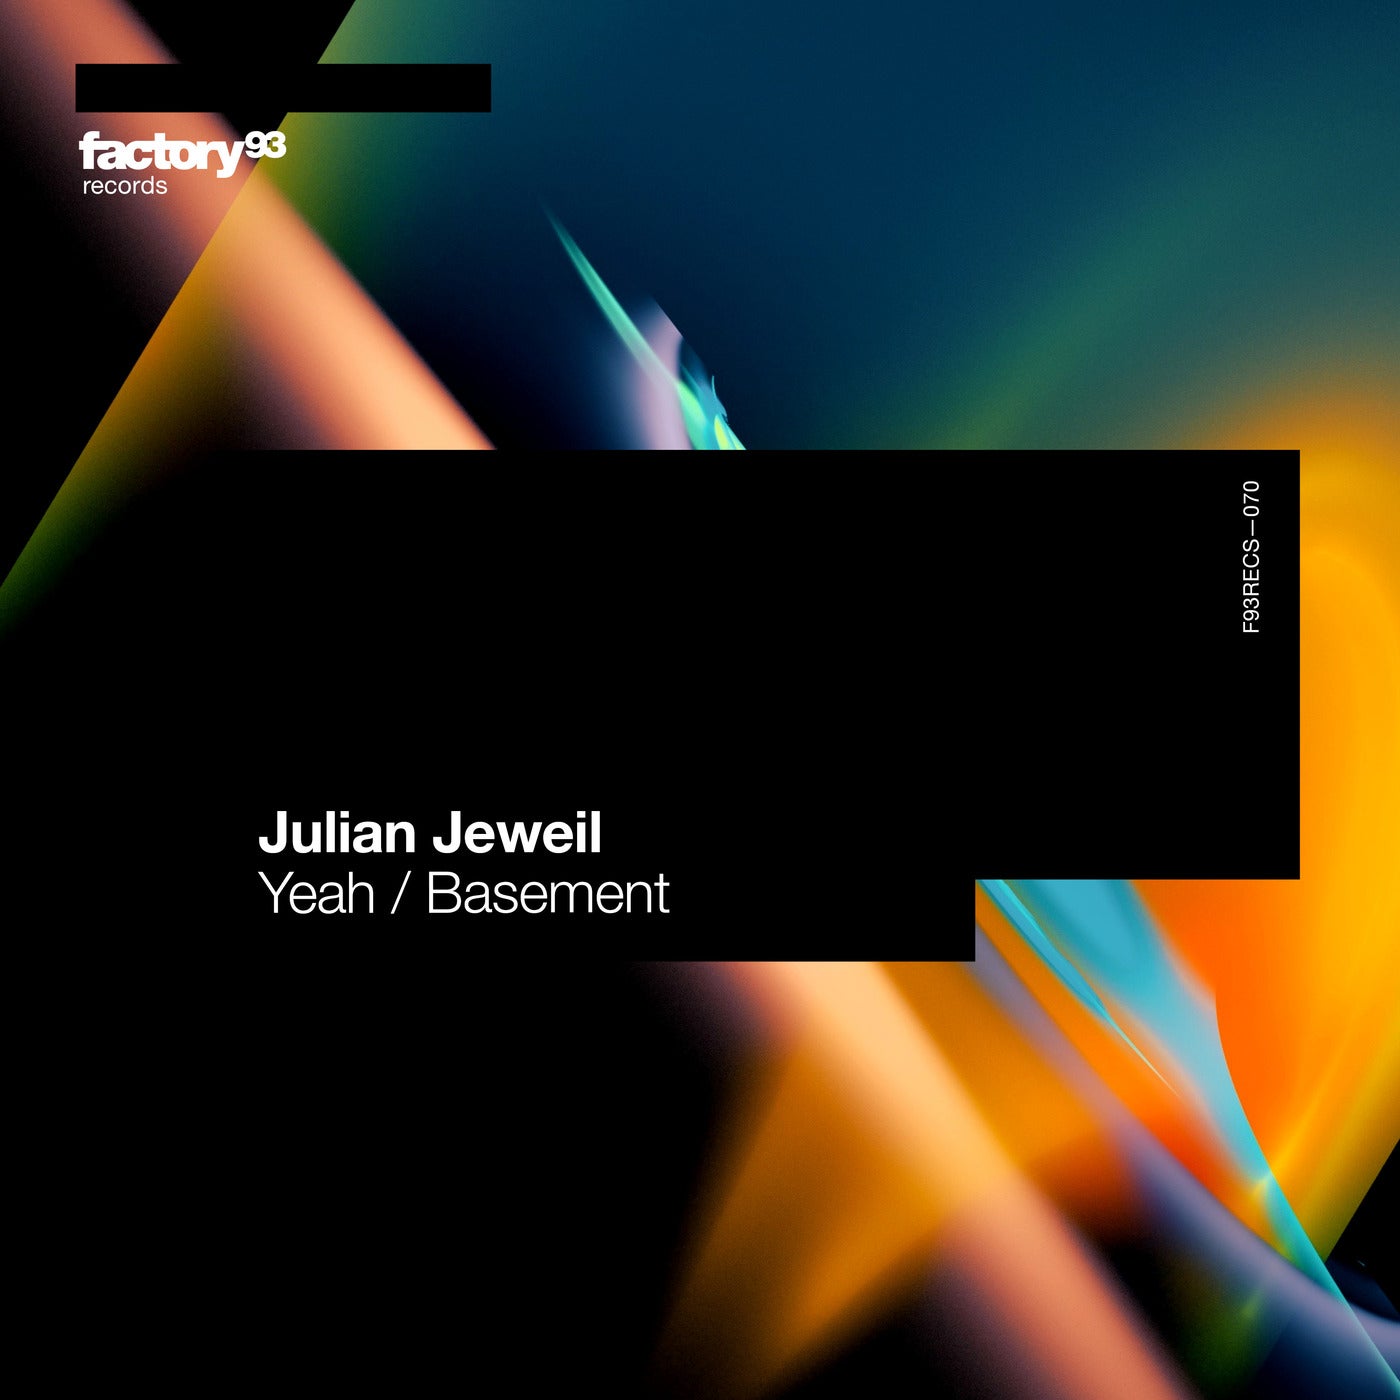 image cover: Julian Jeweil - Yeah / Basement on Factory 93 Records